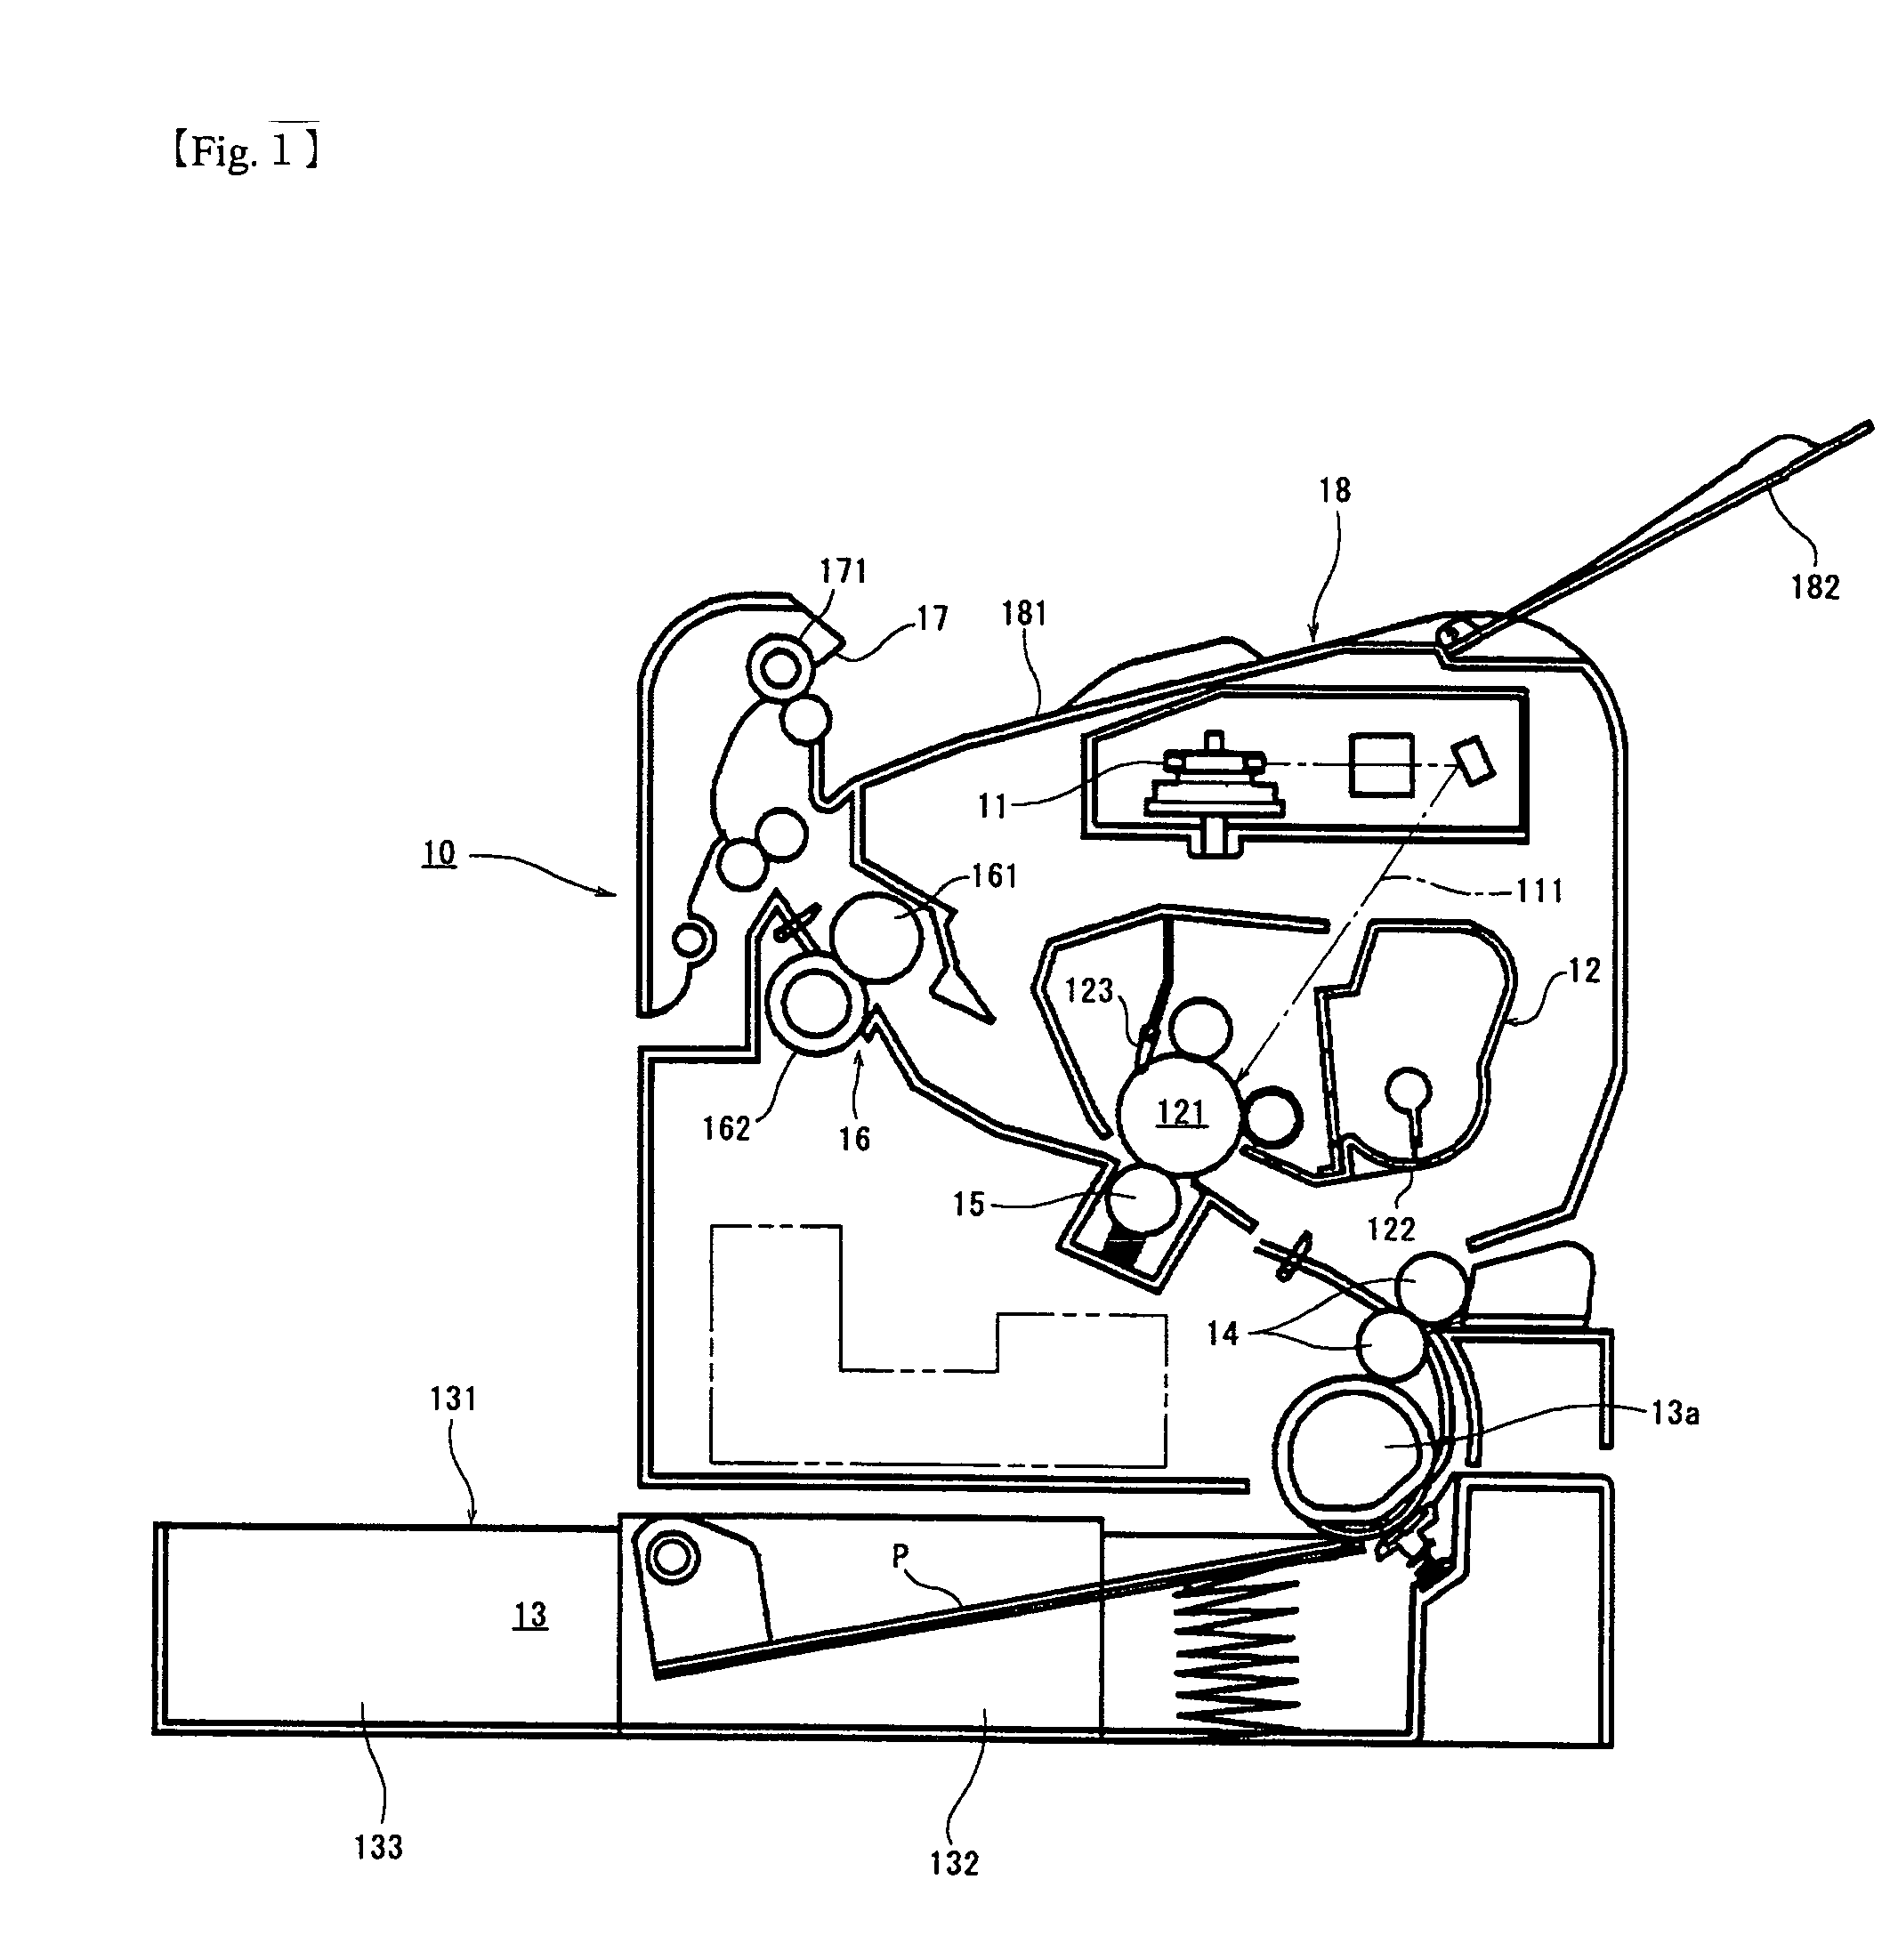 Paper feed cassette for image forming apparatus